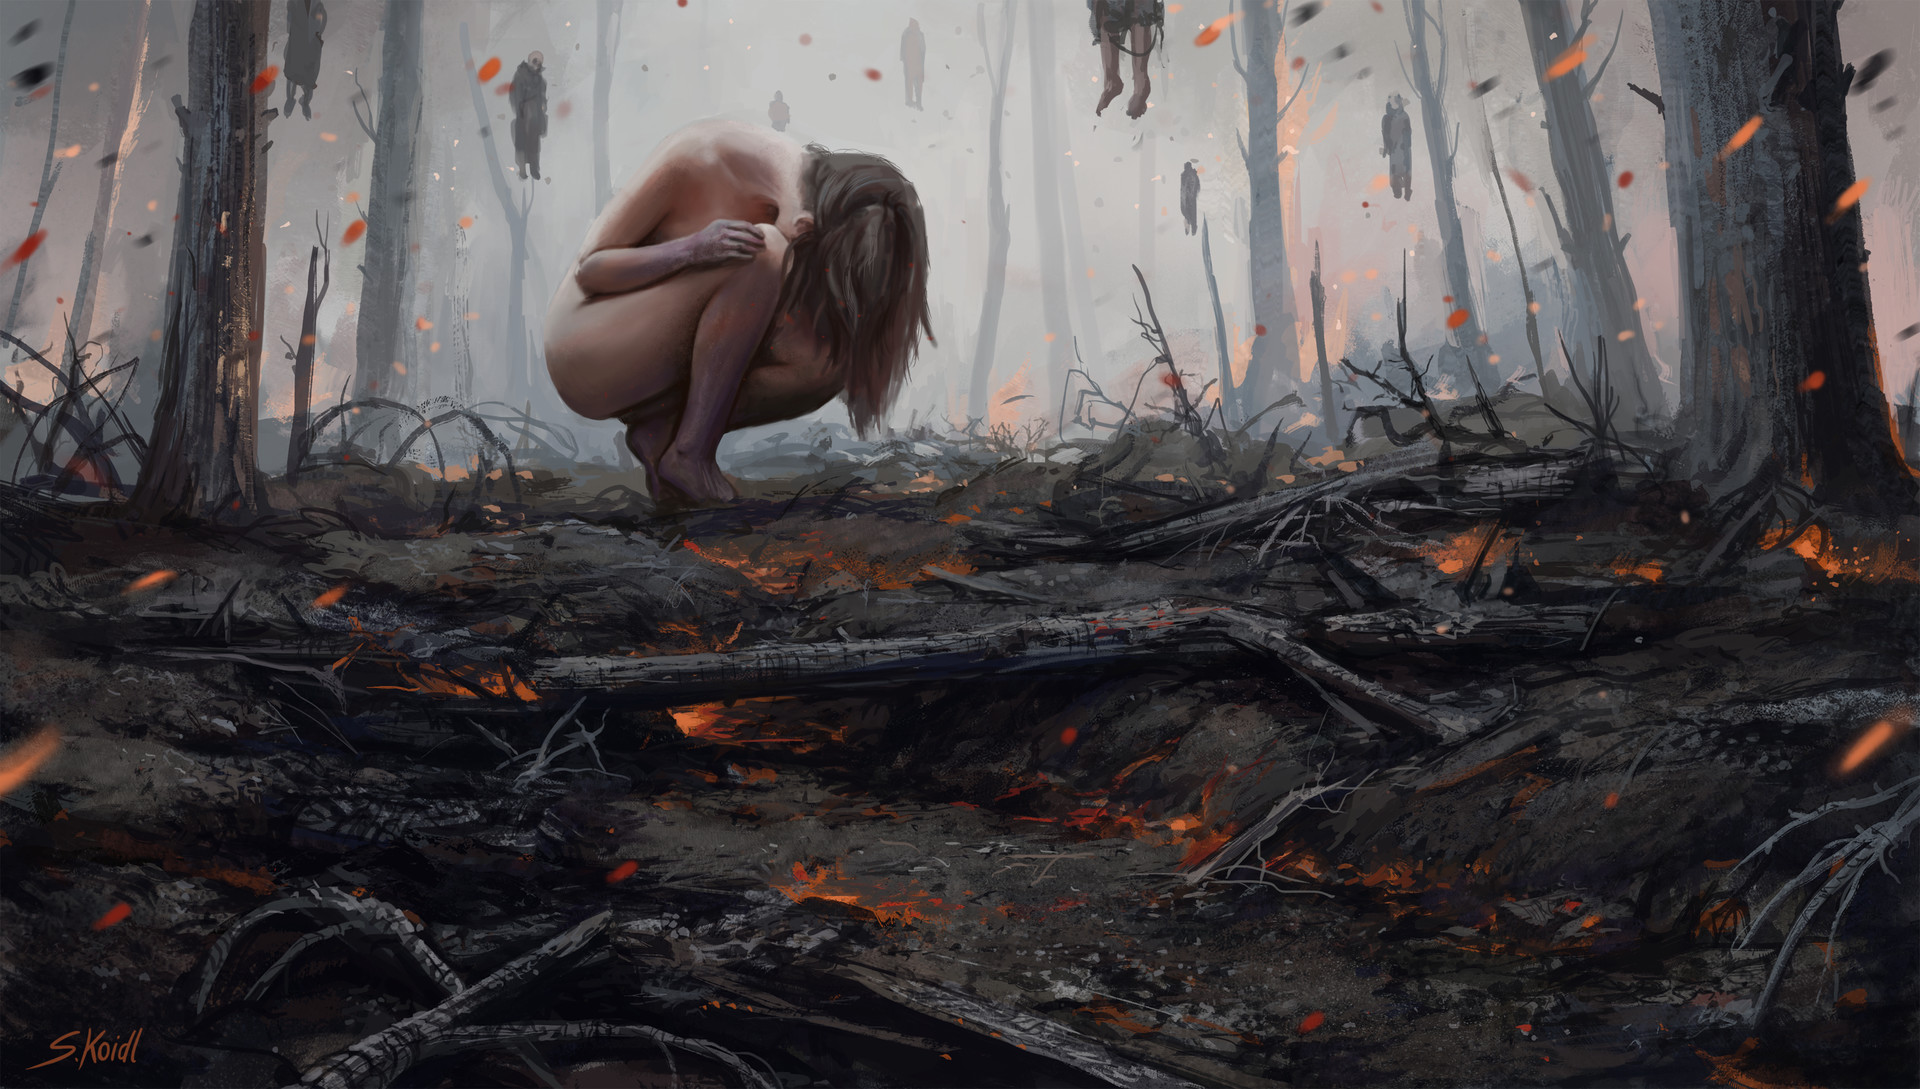 stefan-koidl-from-the-ashes2